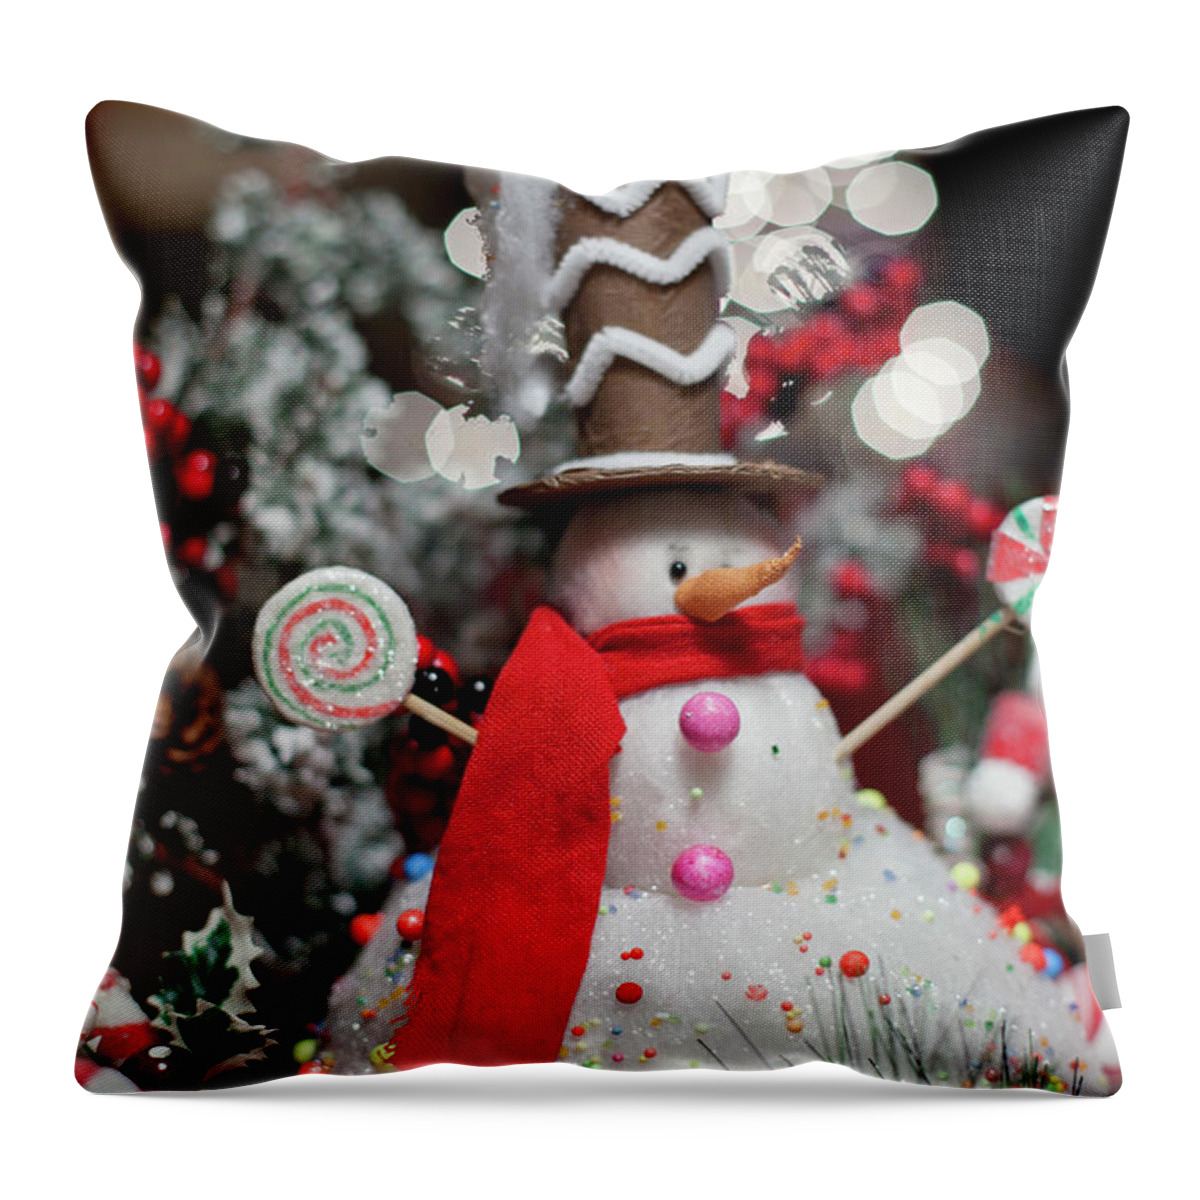 Christmas Throw Pillow featuring the photograph Peppermint Snowman by Toni Hopper